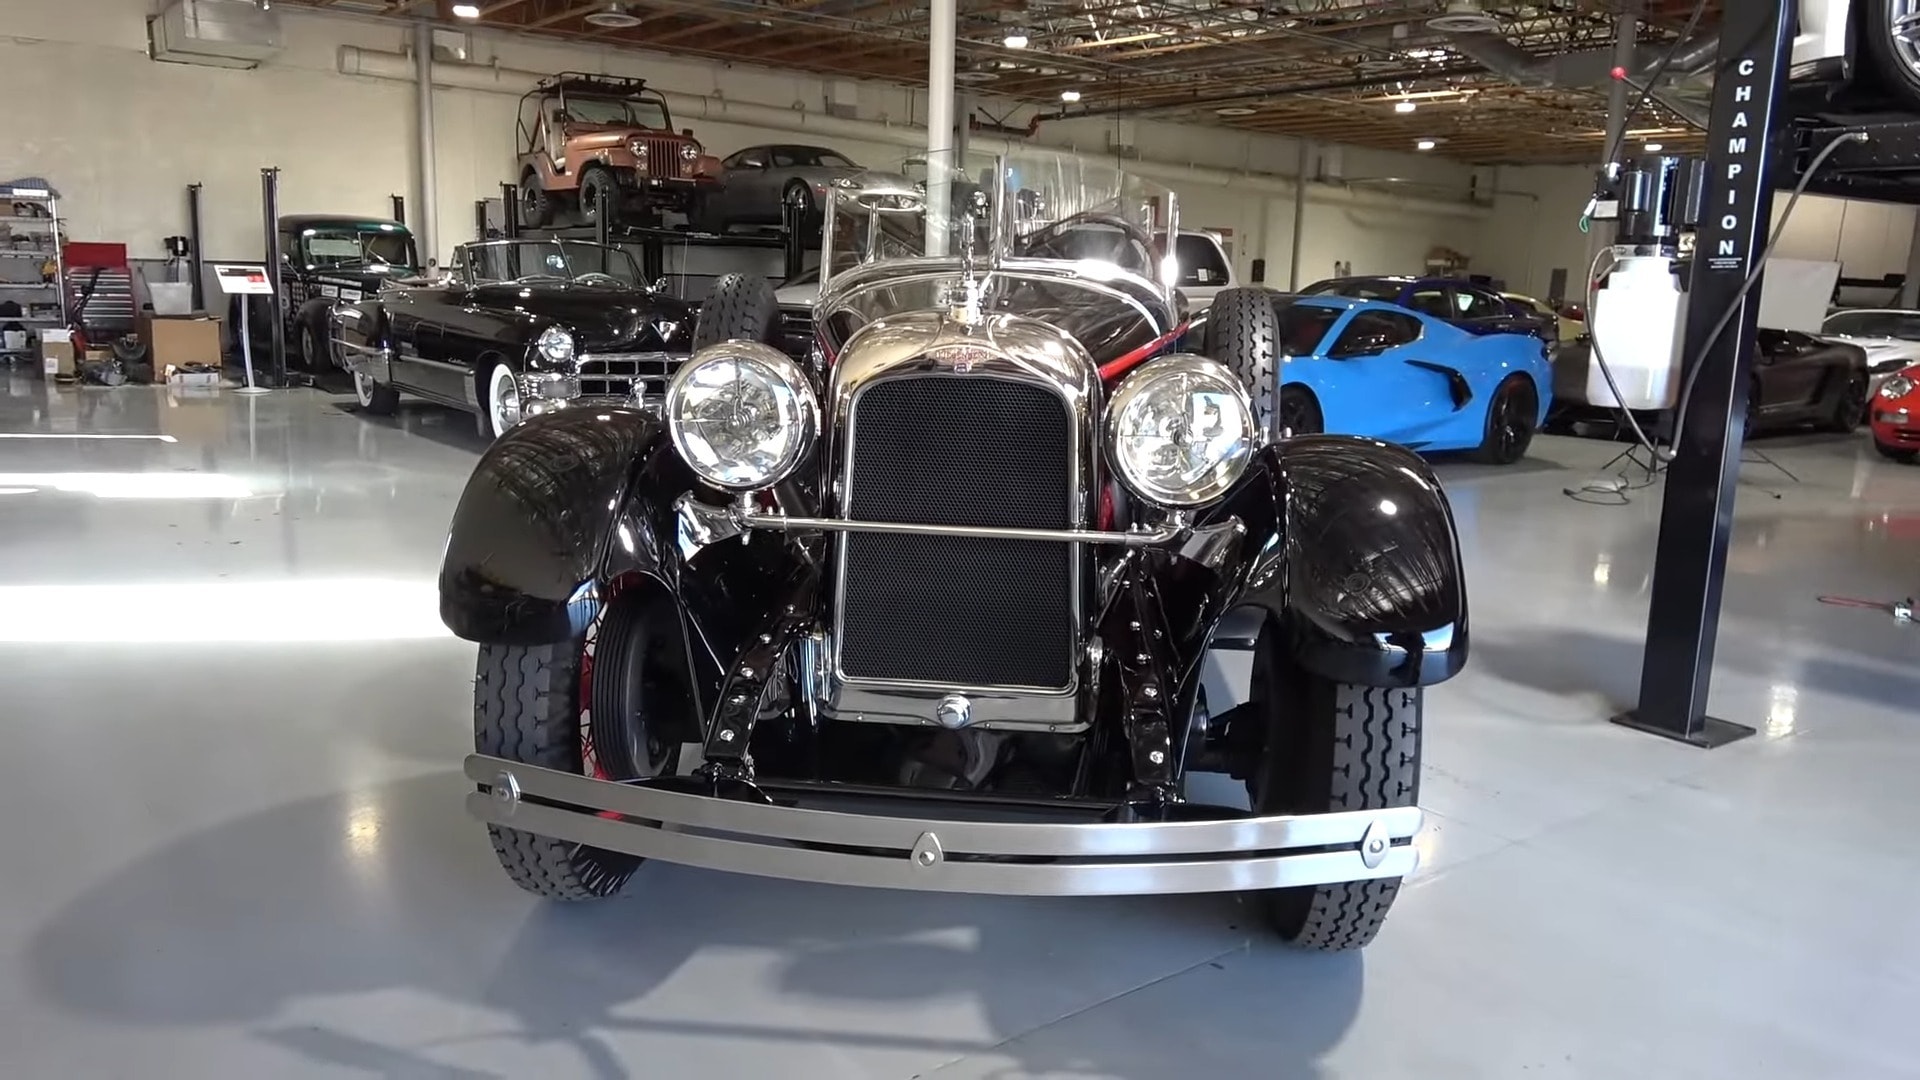 Duesenberg: Automotive Excellence of the 1920s Revealed in Restored Classic